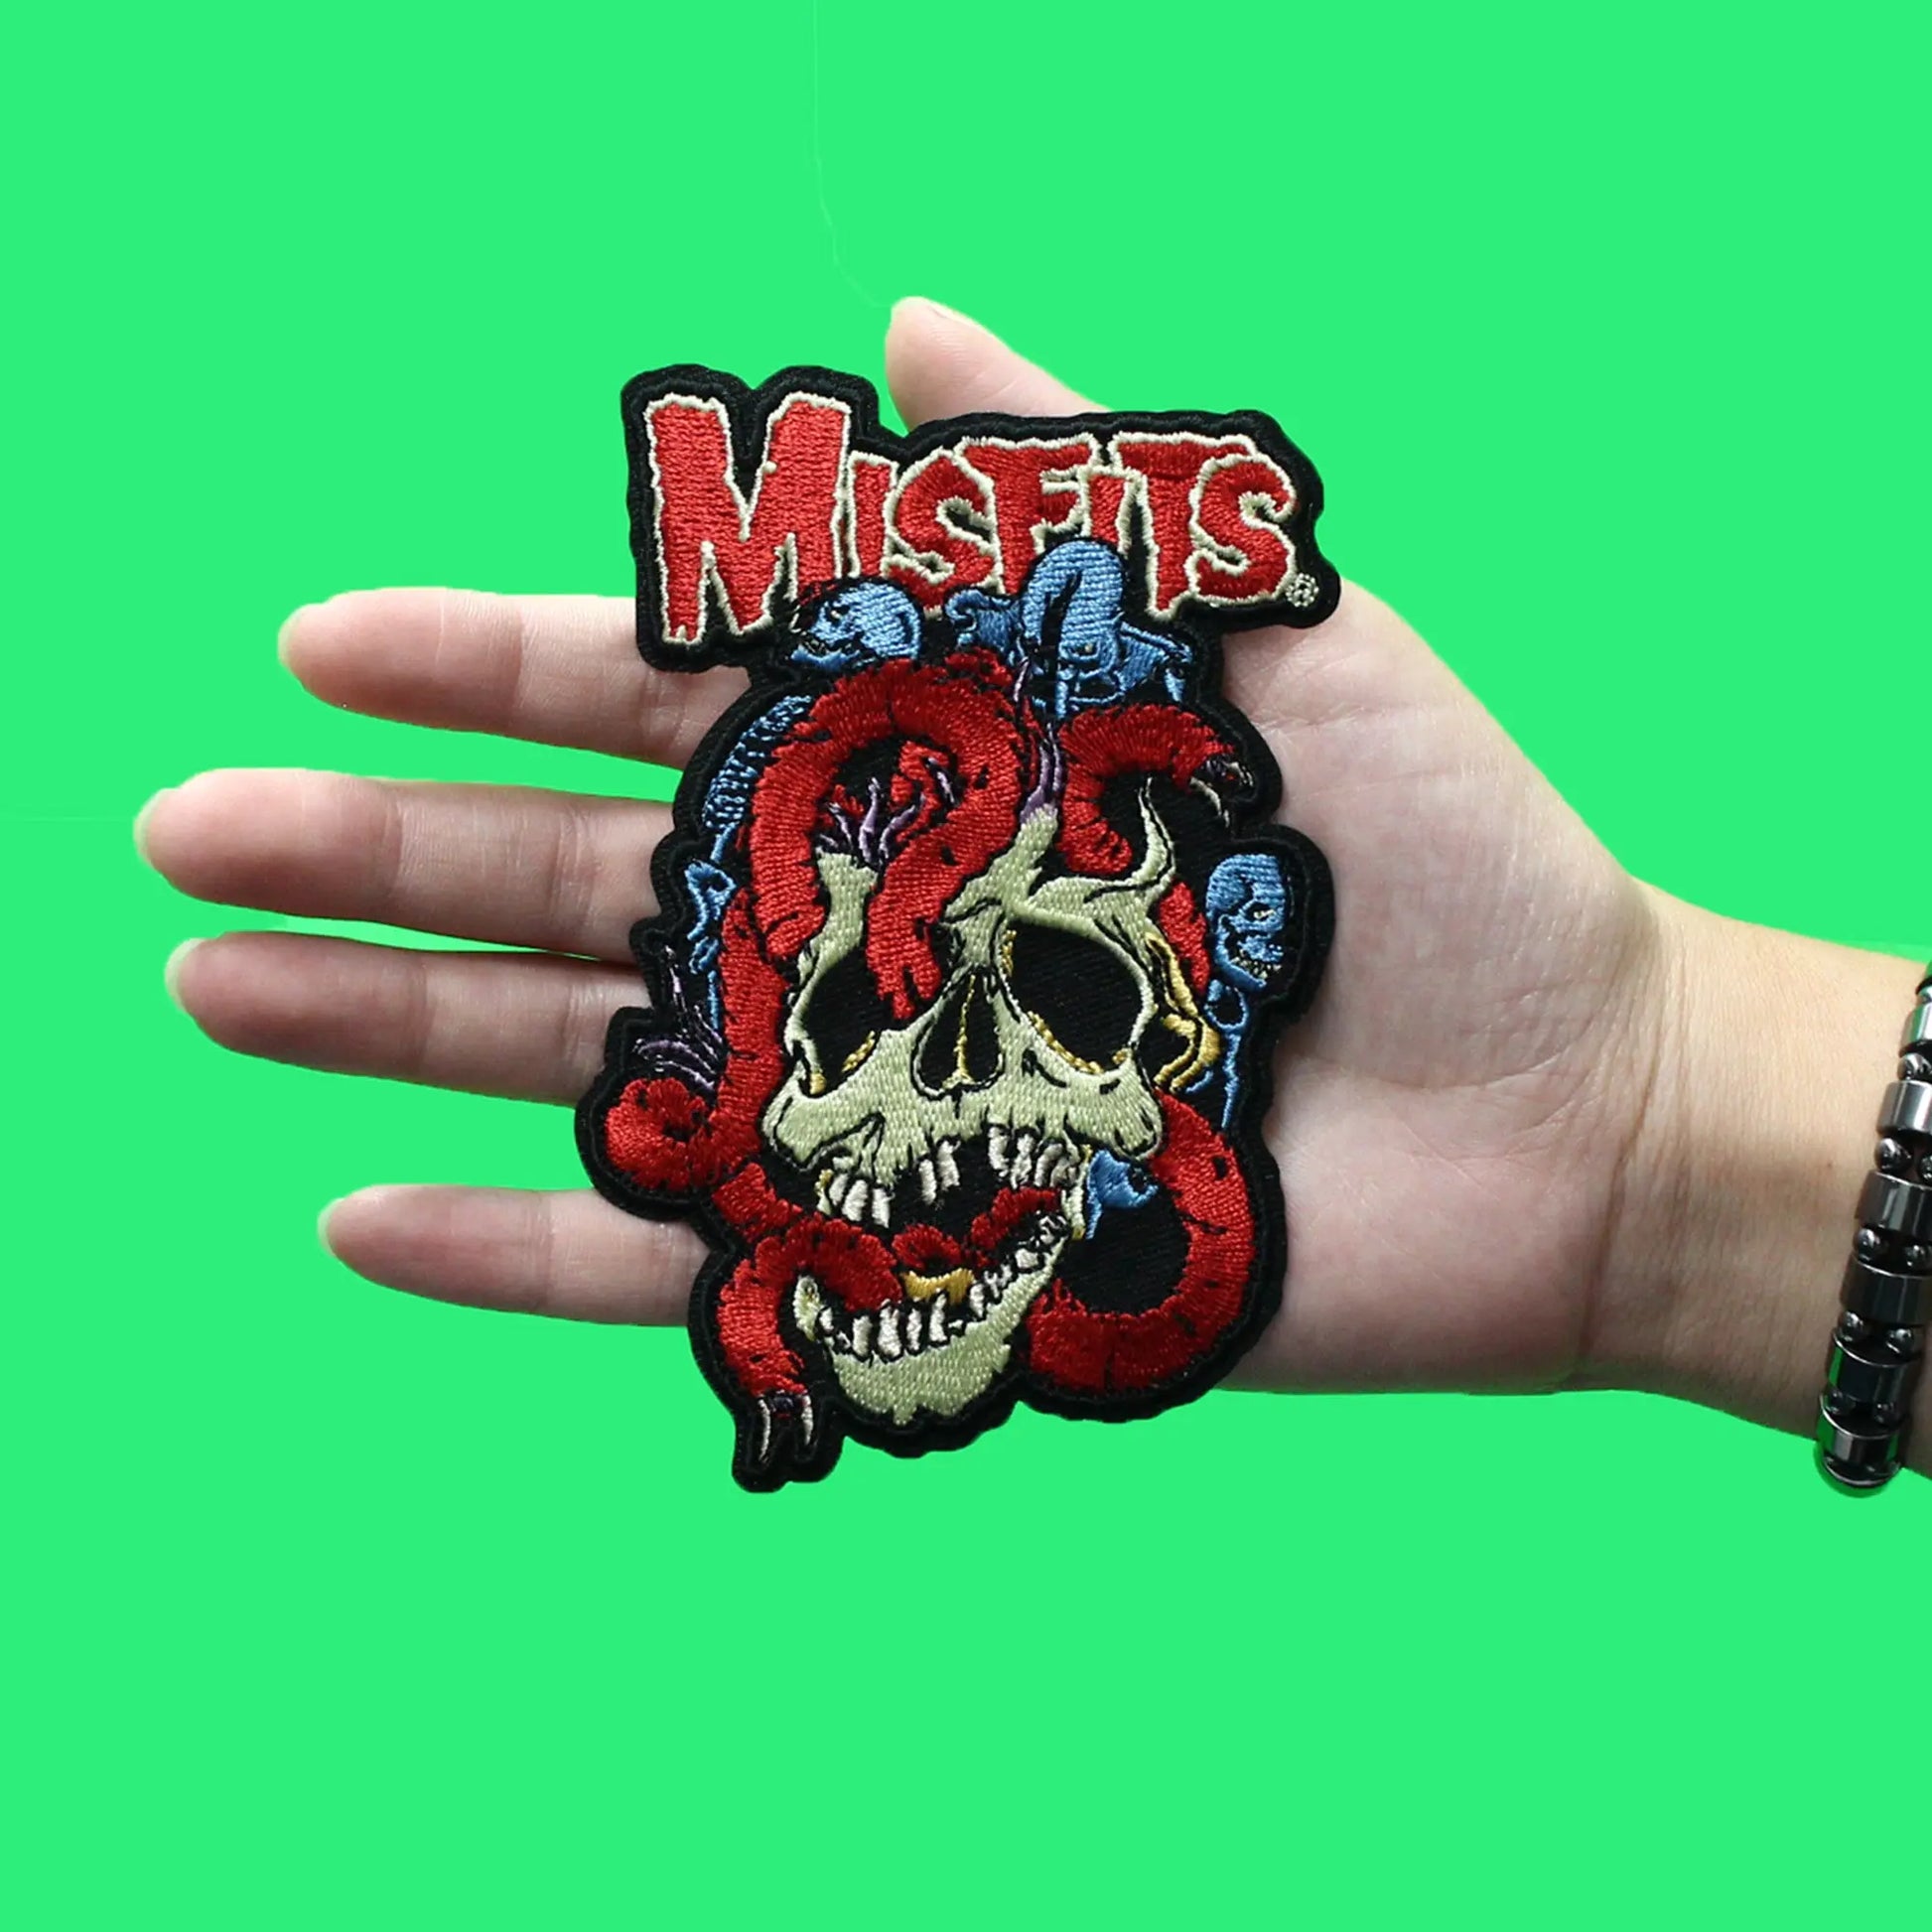 Misfits Patch Death Comes Ripping Embroidered Iron on